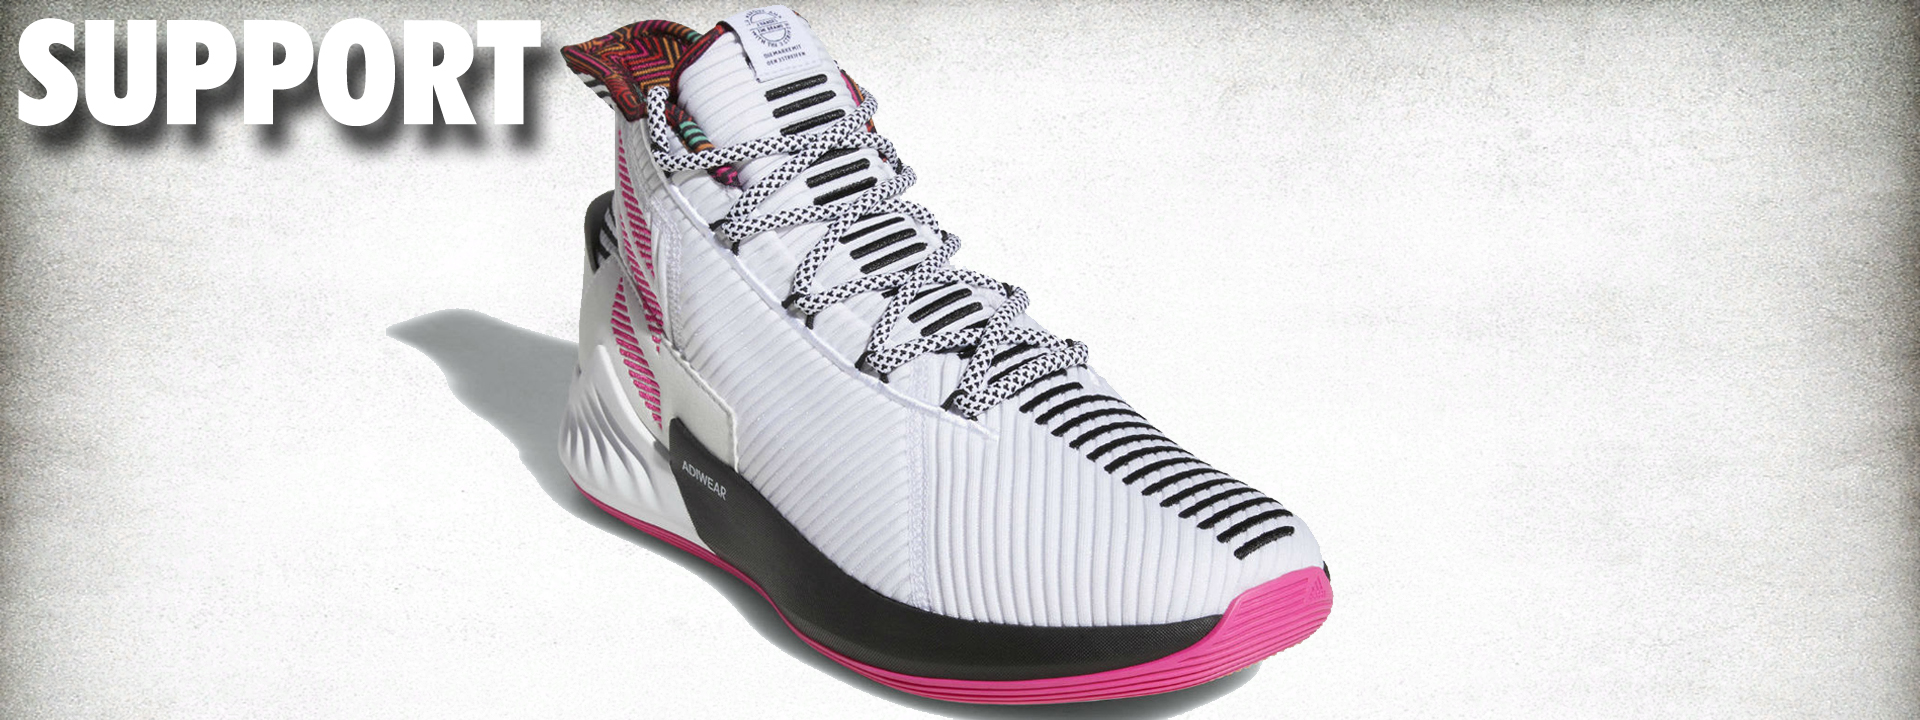 nadie Peave compartir adidas D Rose 9 Performance Review | Duke4005 - WearTesters